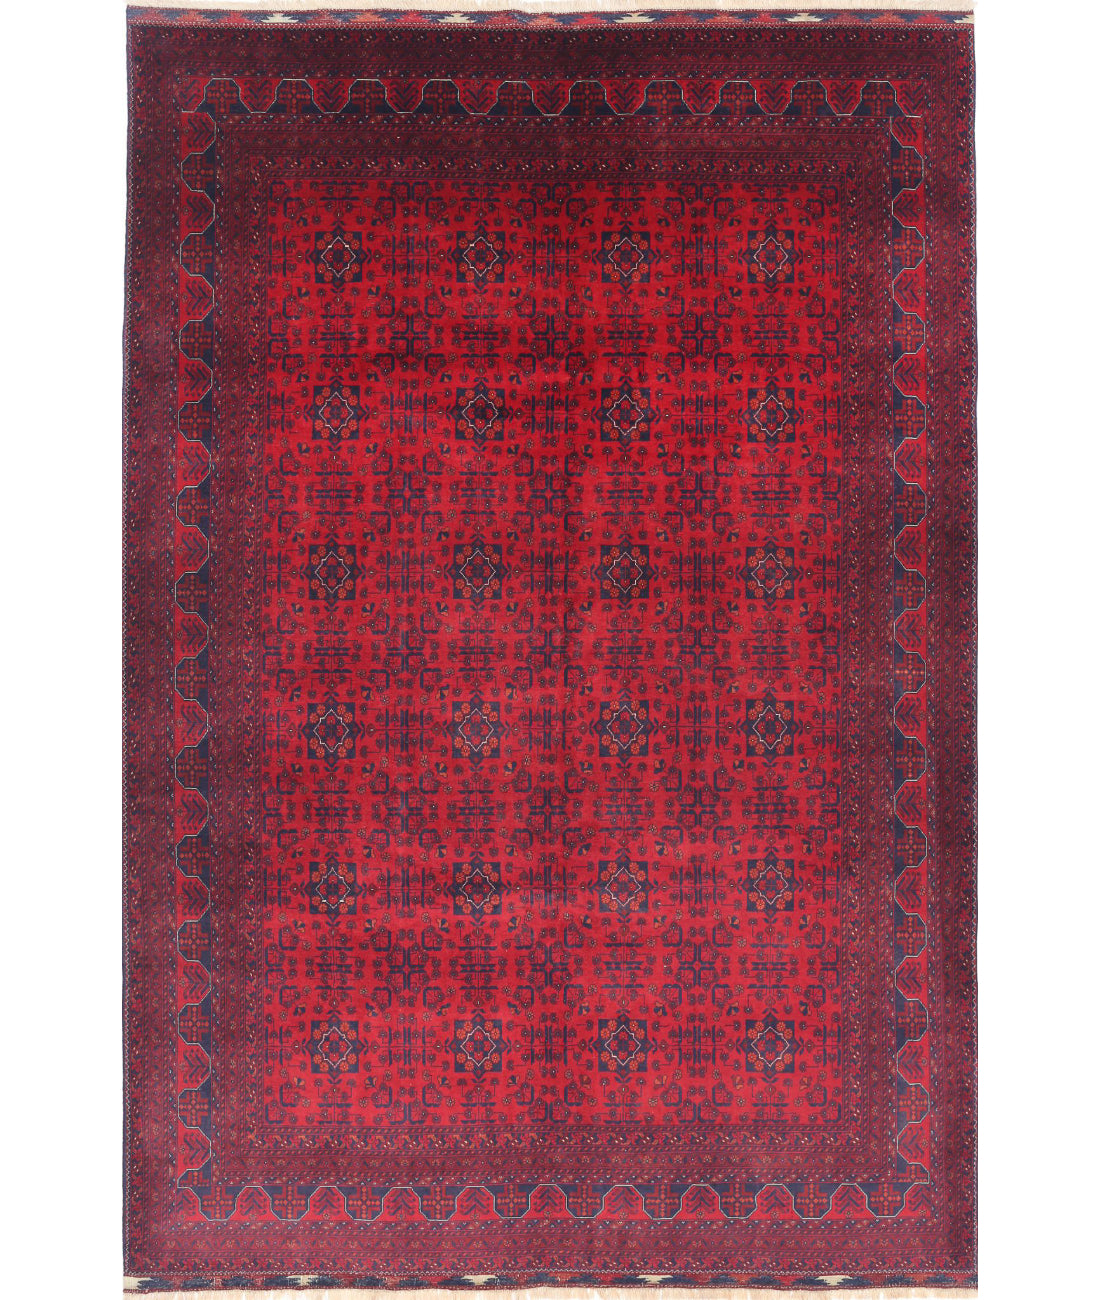 Hand Knotted Afghan Beljik Wool Rug - 6'6'' x 9'7'' 6'6'' x 9'7'' (195 X 288) / Red / Red